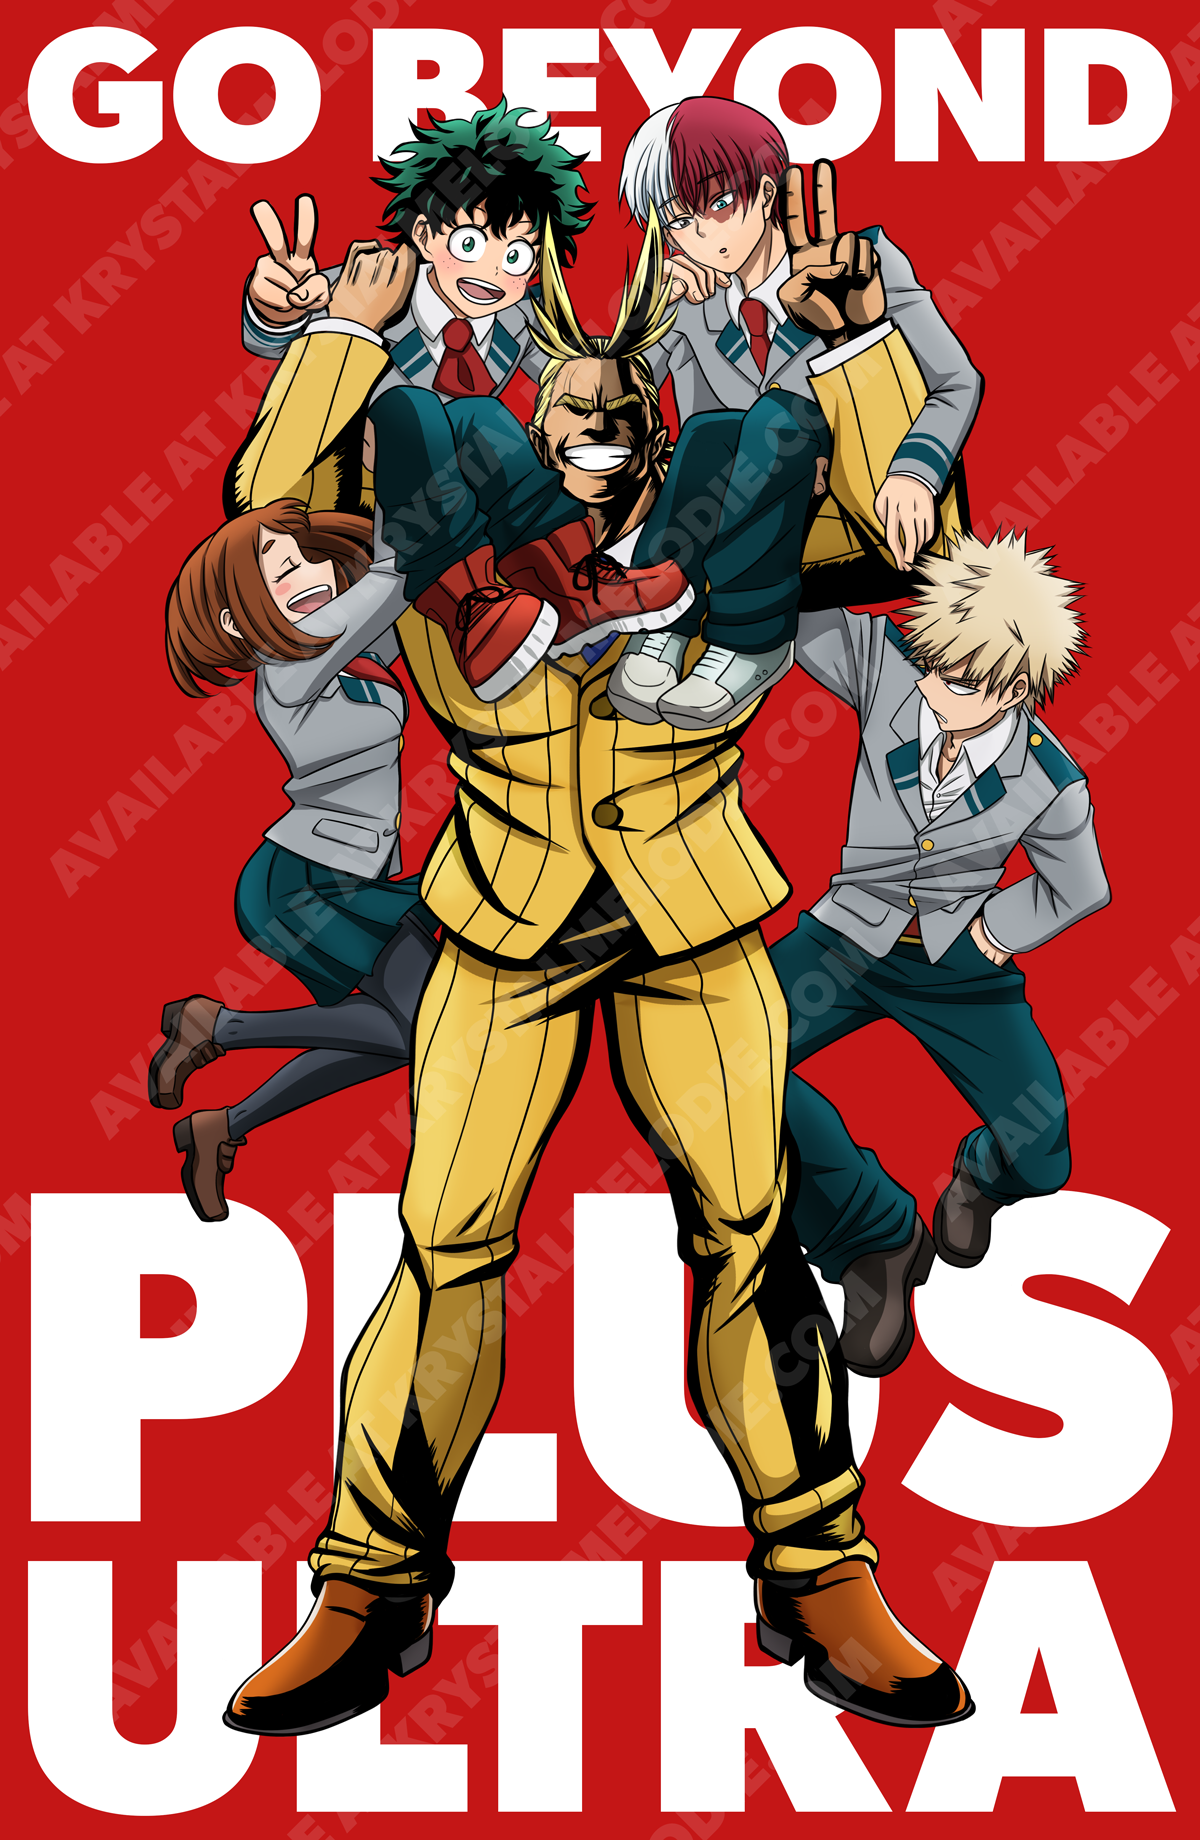 Plus-Ultra-Watermarked.png